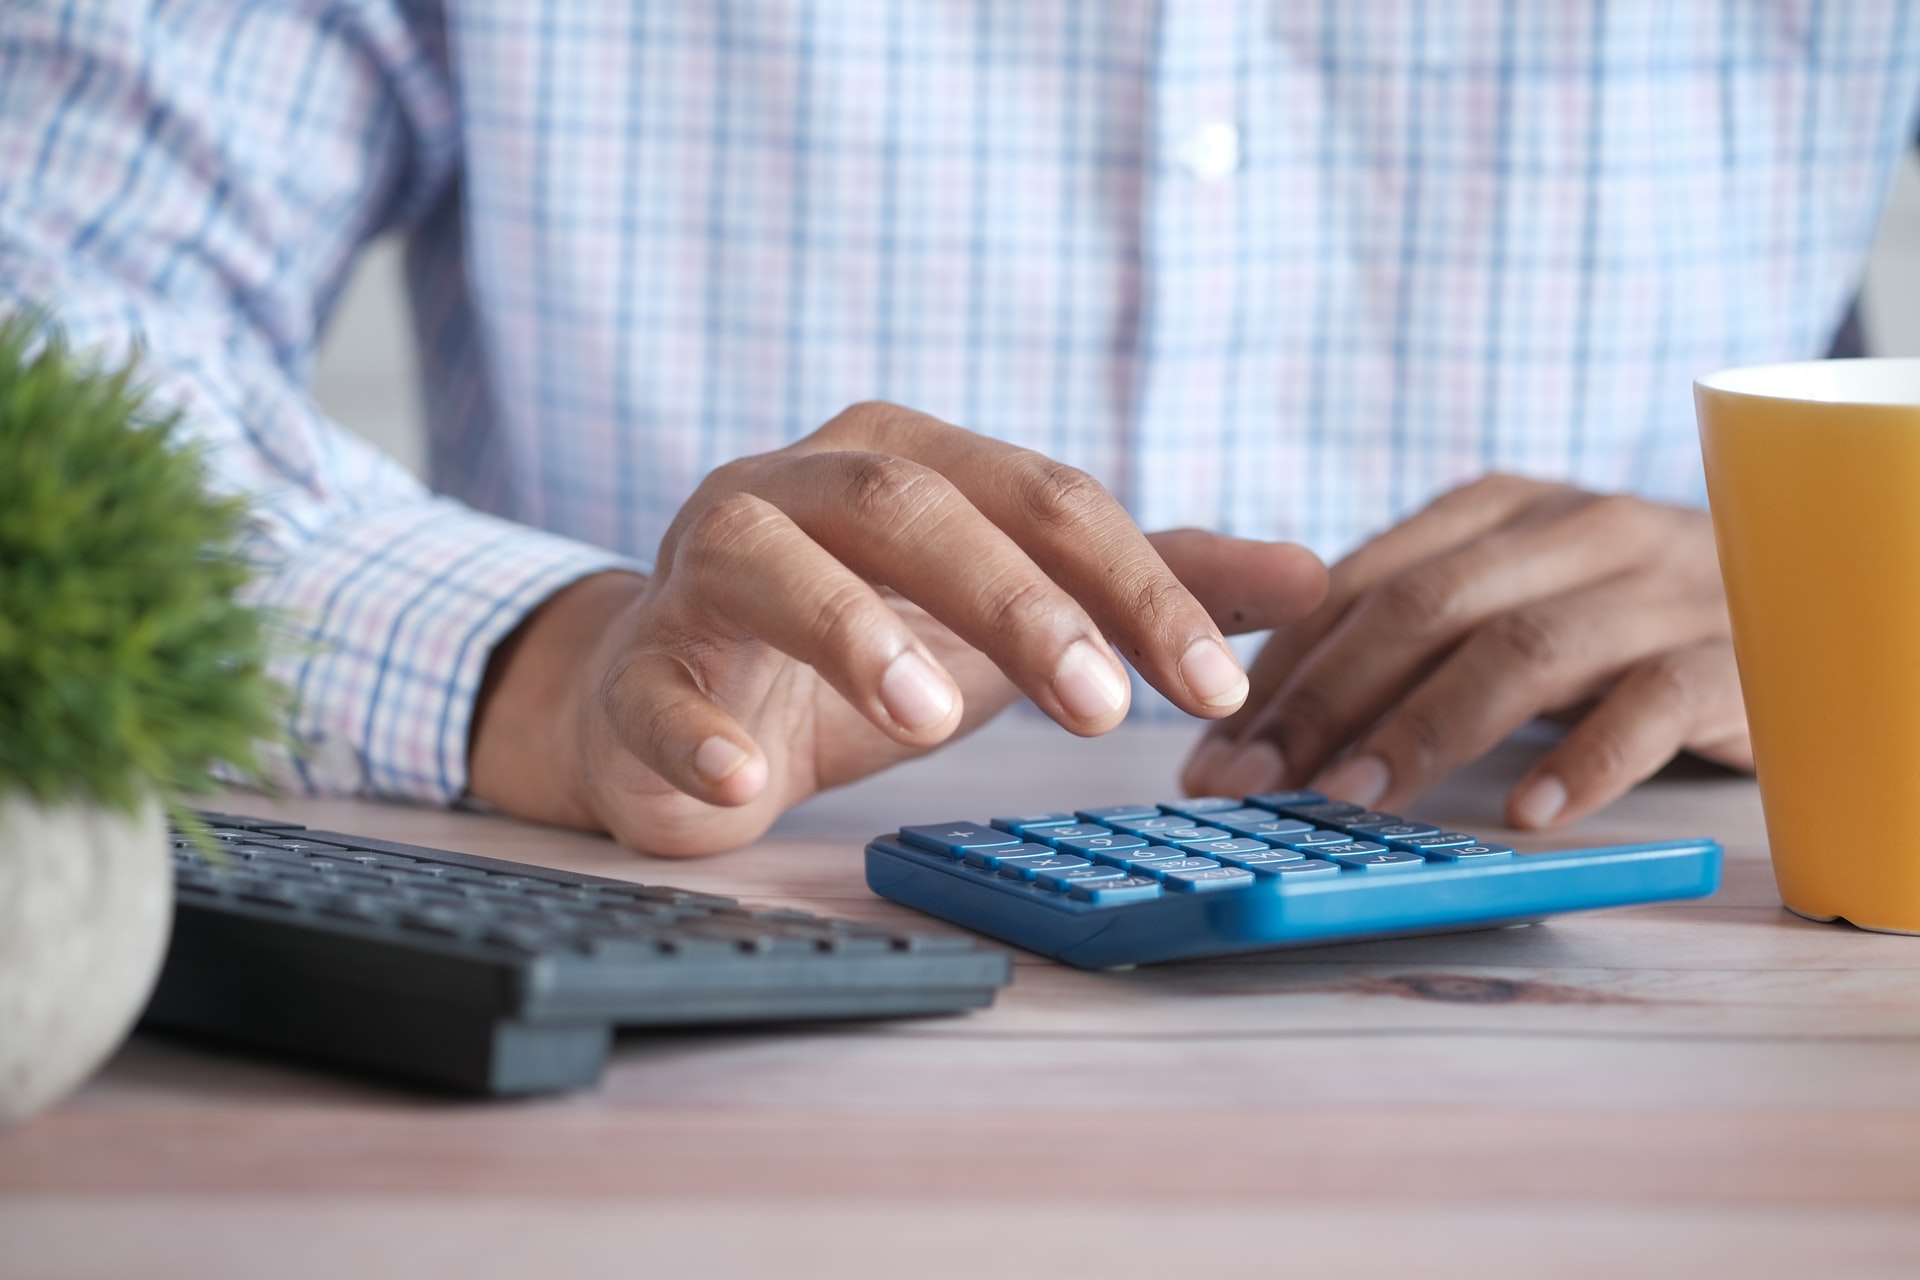 Man sitting at a desk using a blue calculator, which is sitting beside a black computer keyboard. He is wearing a pink, white and blue checked shirt, and has a orange coffee mug in front of him.